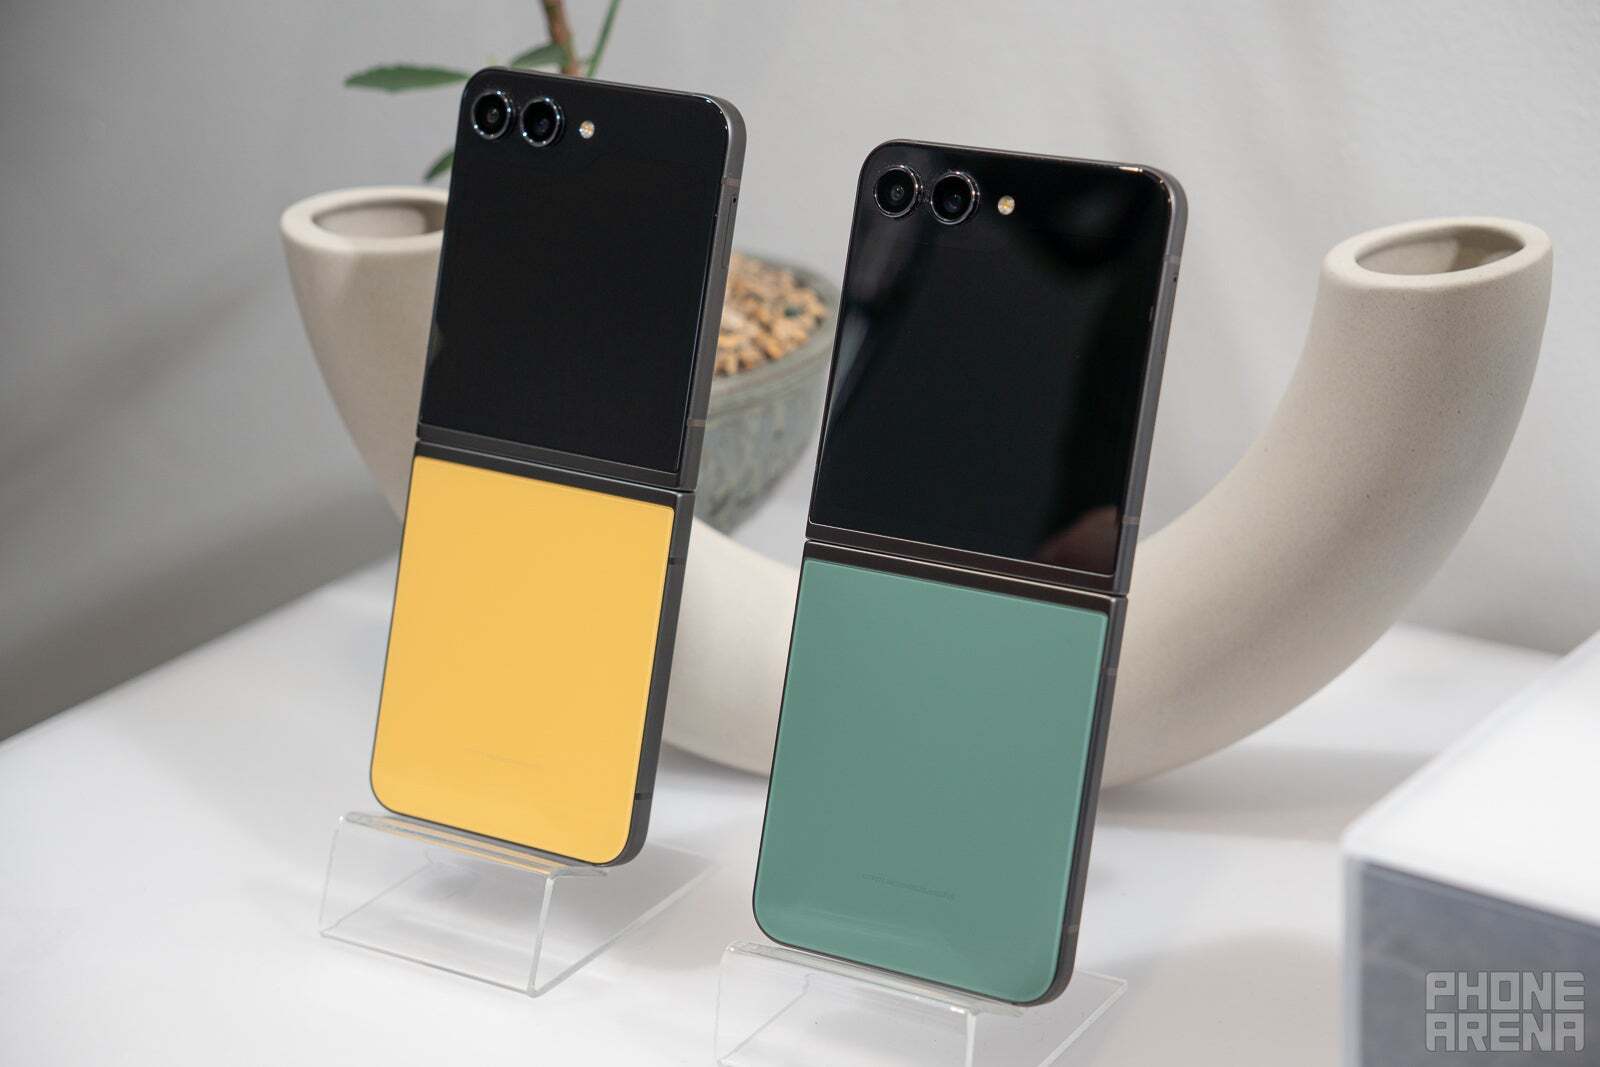 Flip 5 in Yellow and Green (Image Source - PhoneArena) - Galaxy Z Flip 6 colors: all the rumored shades